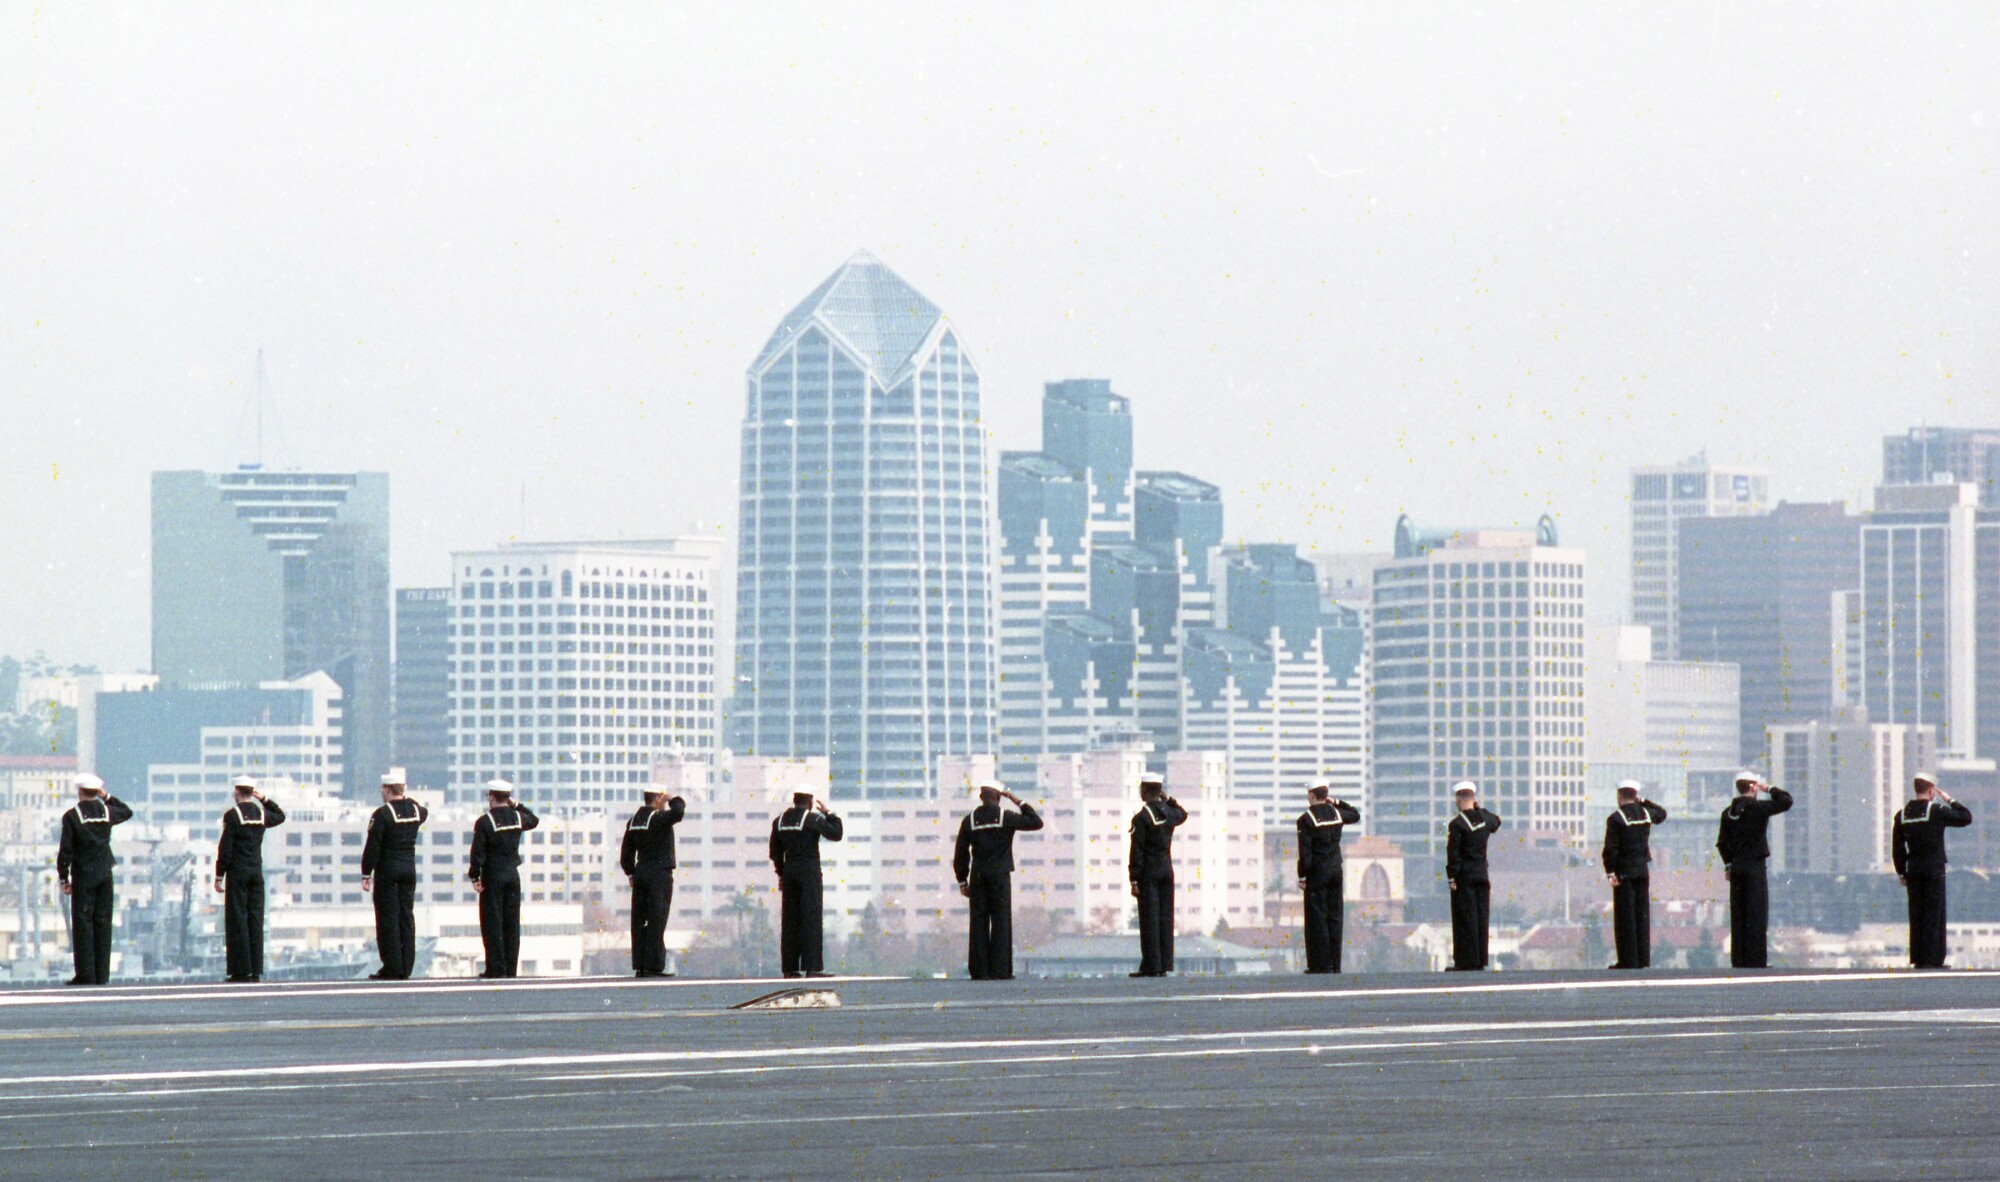 With the city skyline in the background sailors aboard the aircraft carrier Kitty Hawk line flight deck